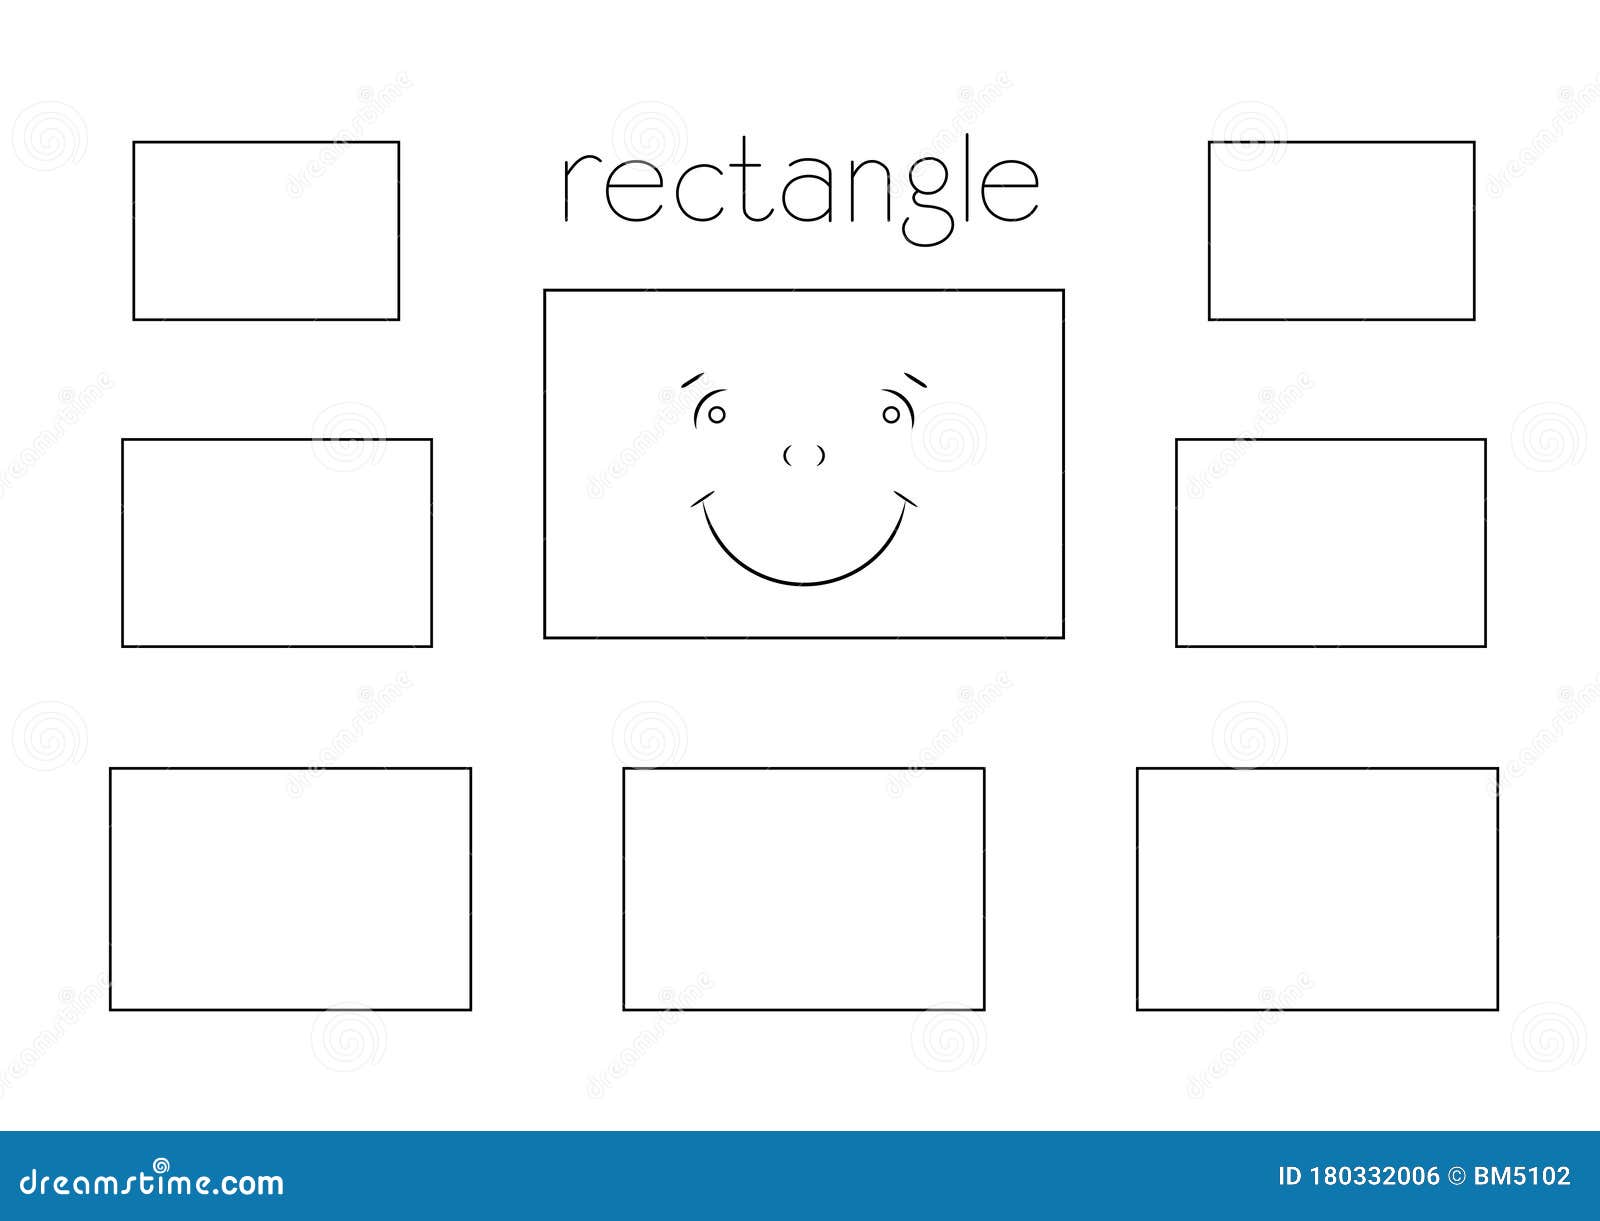 Basic shapes coloring page for kids cartoon rectangle with face stock illustration